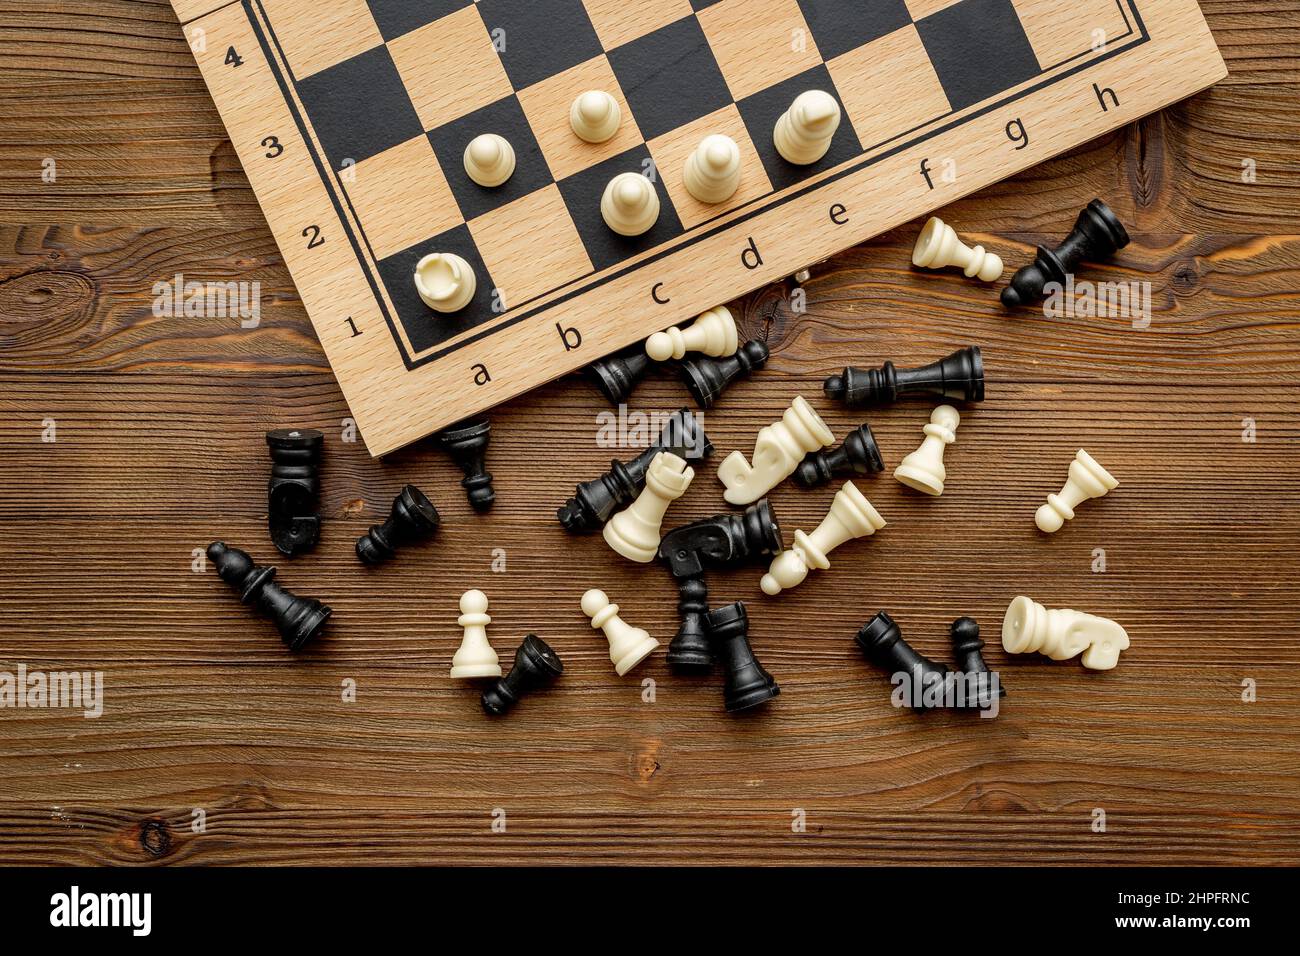 Premium Photo  Chess board - a competitive business idea to succeed.